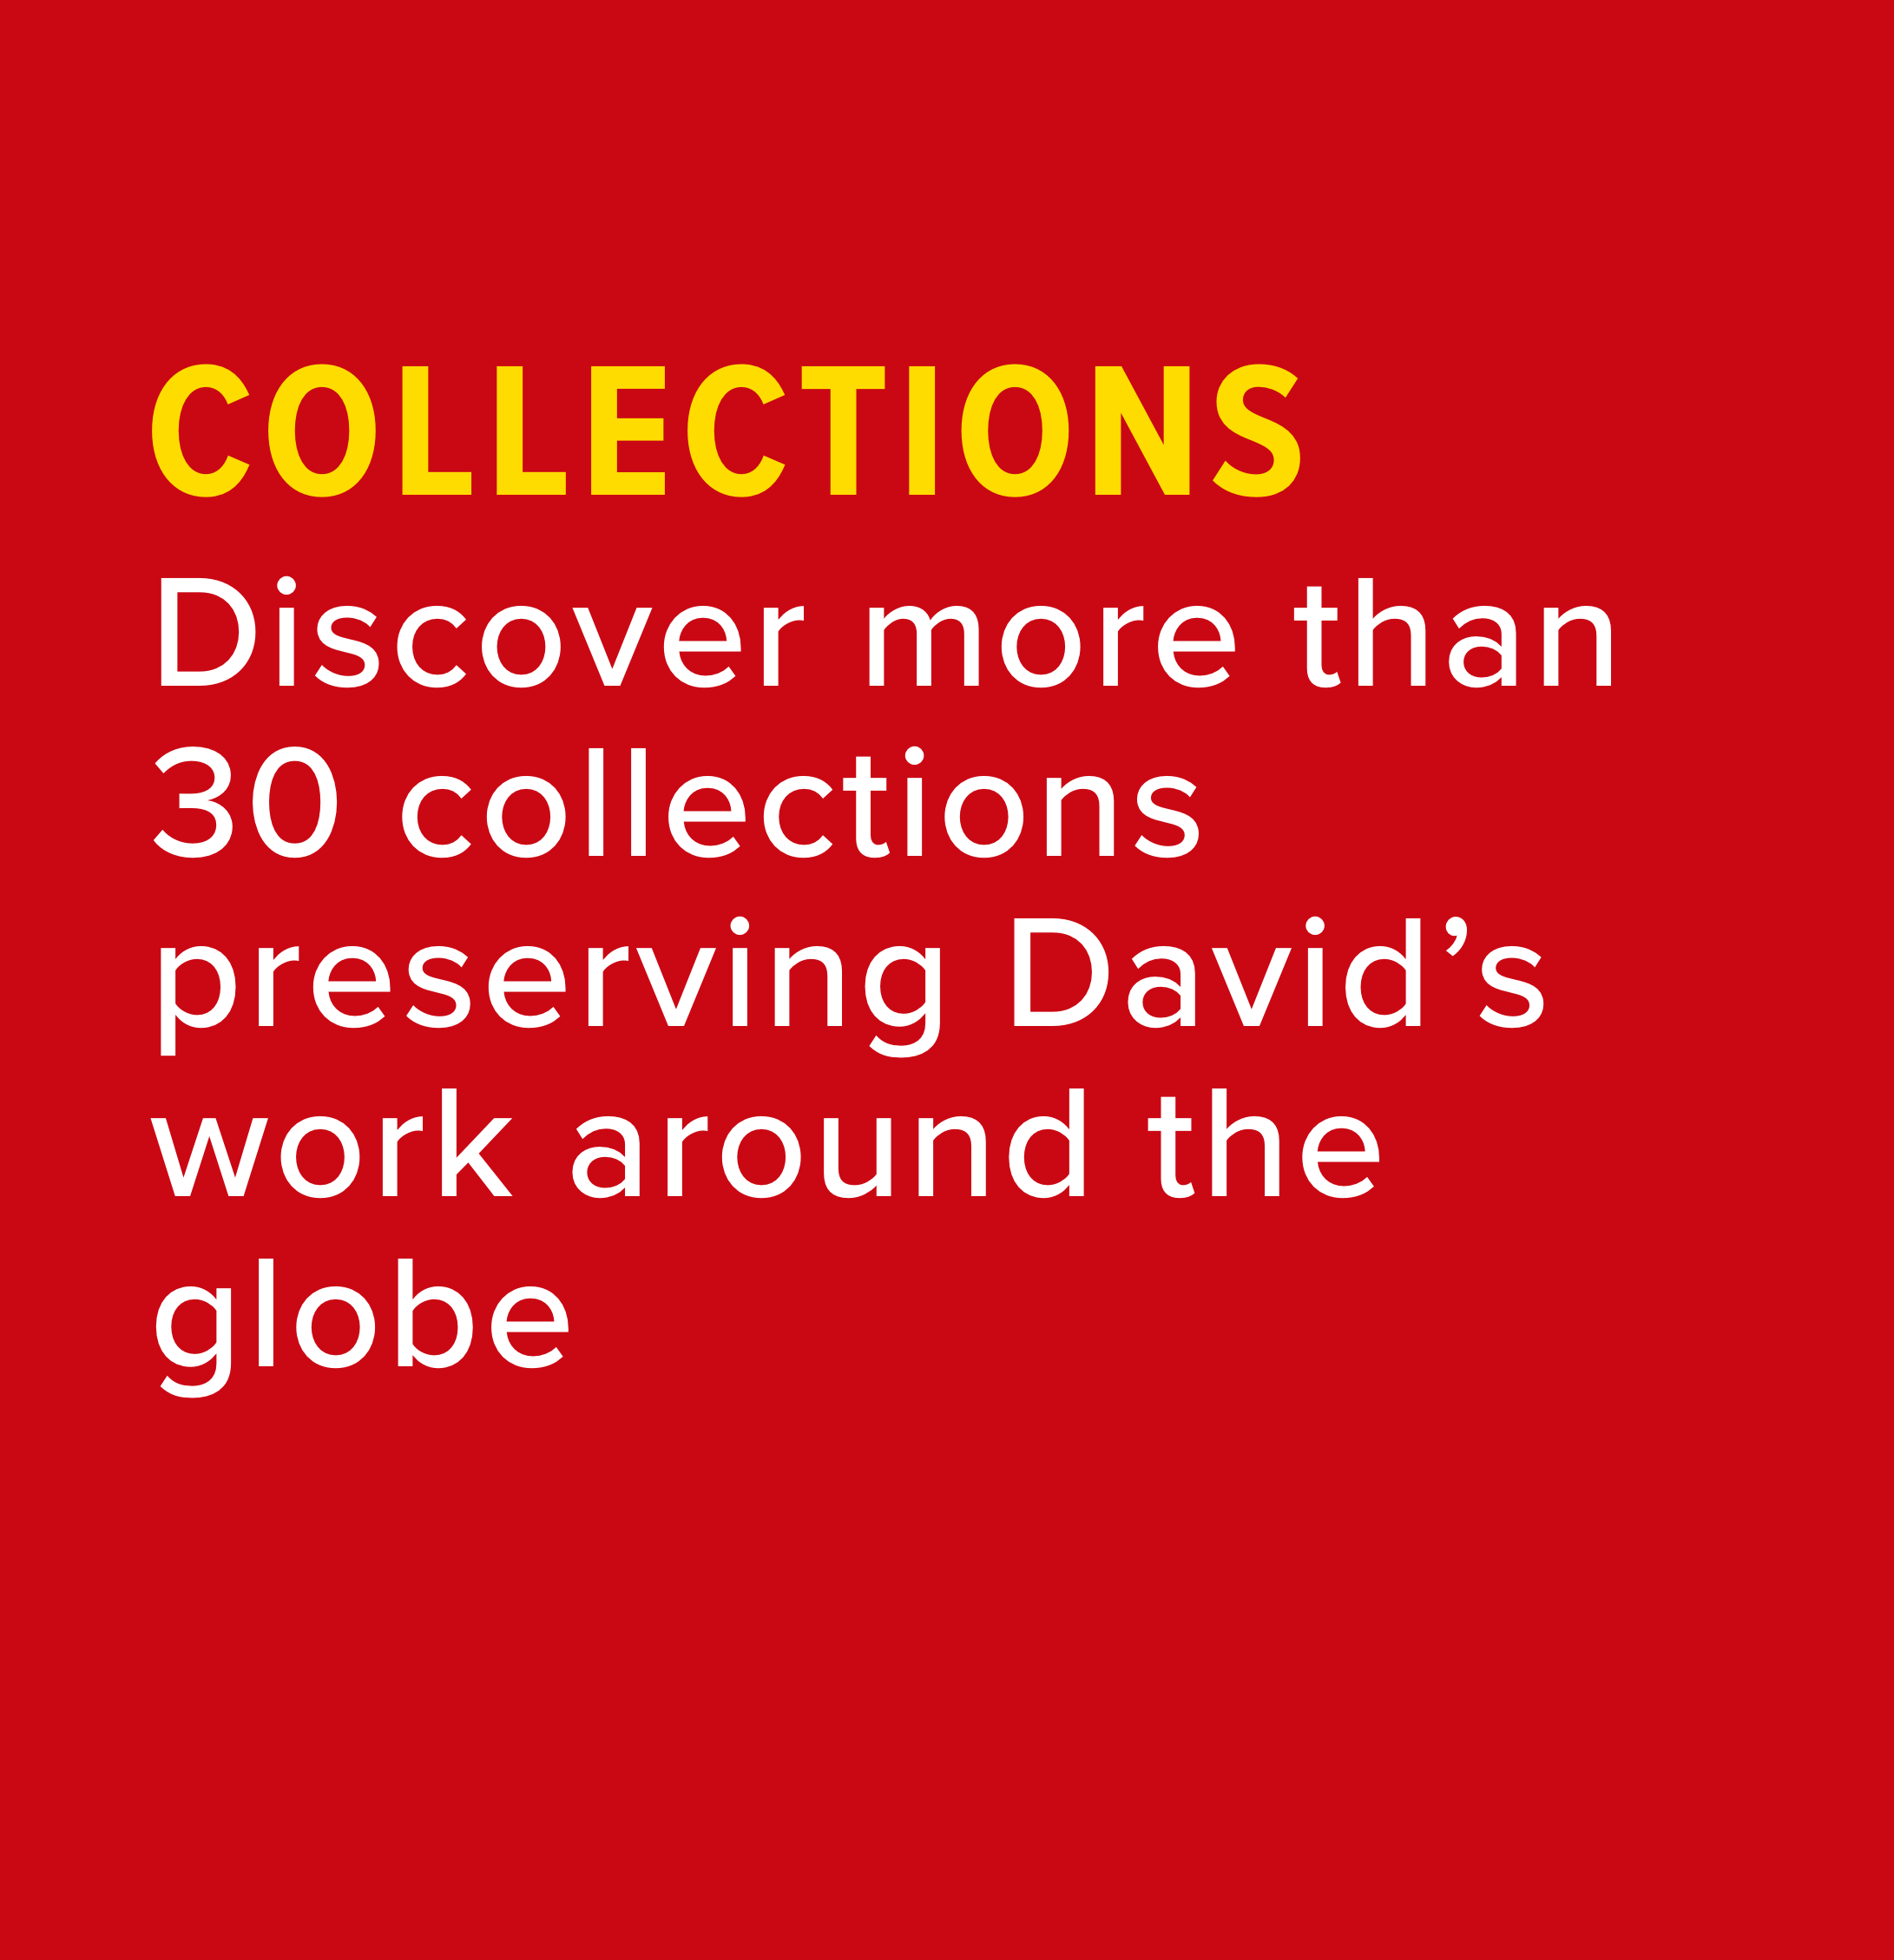 Discover more than 30 collections preserving David’s work around the globe